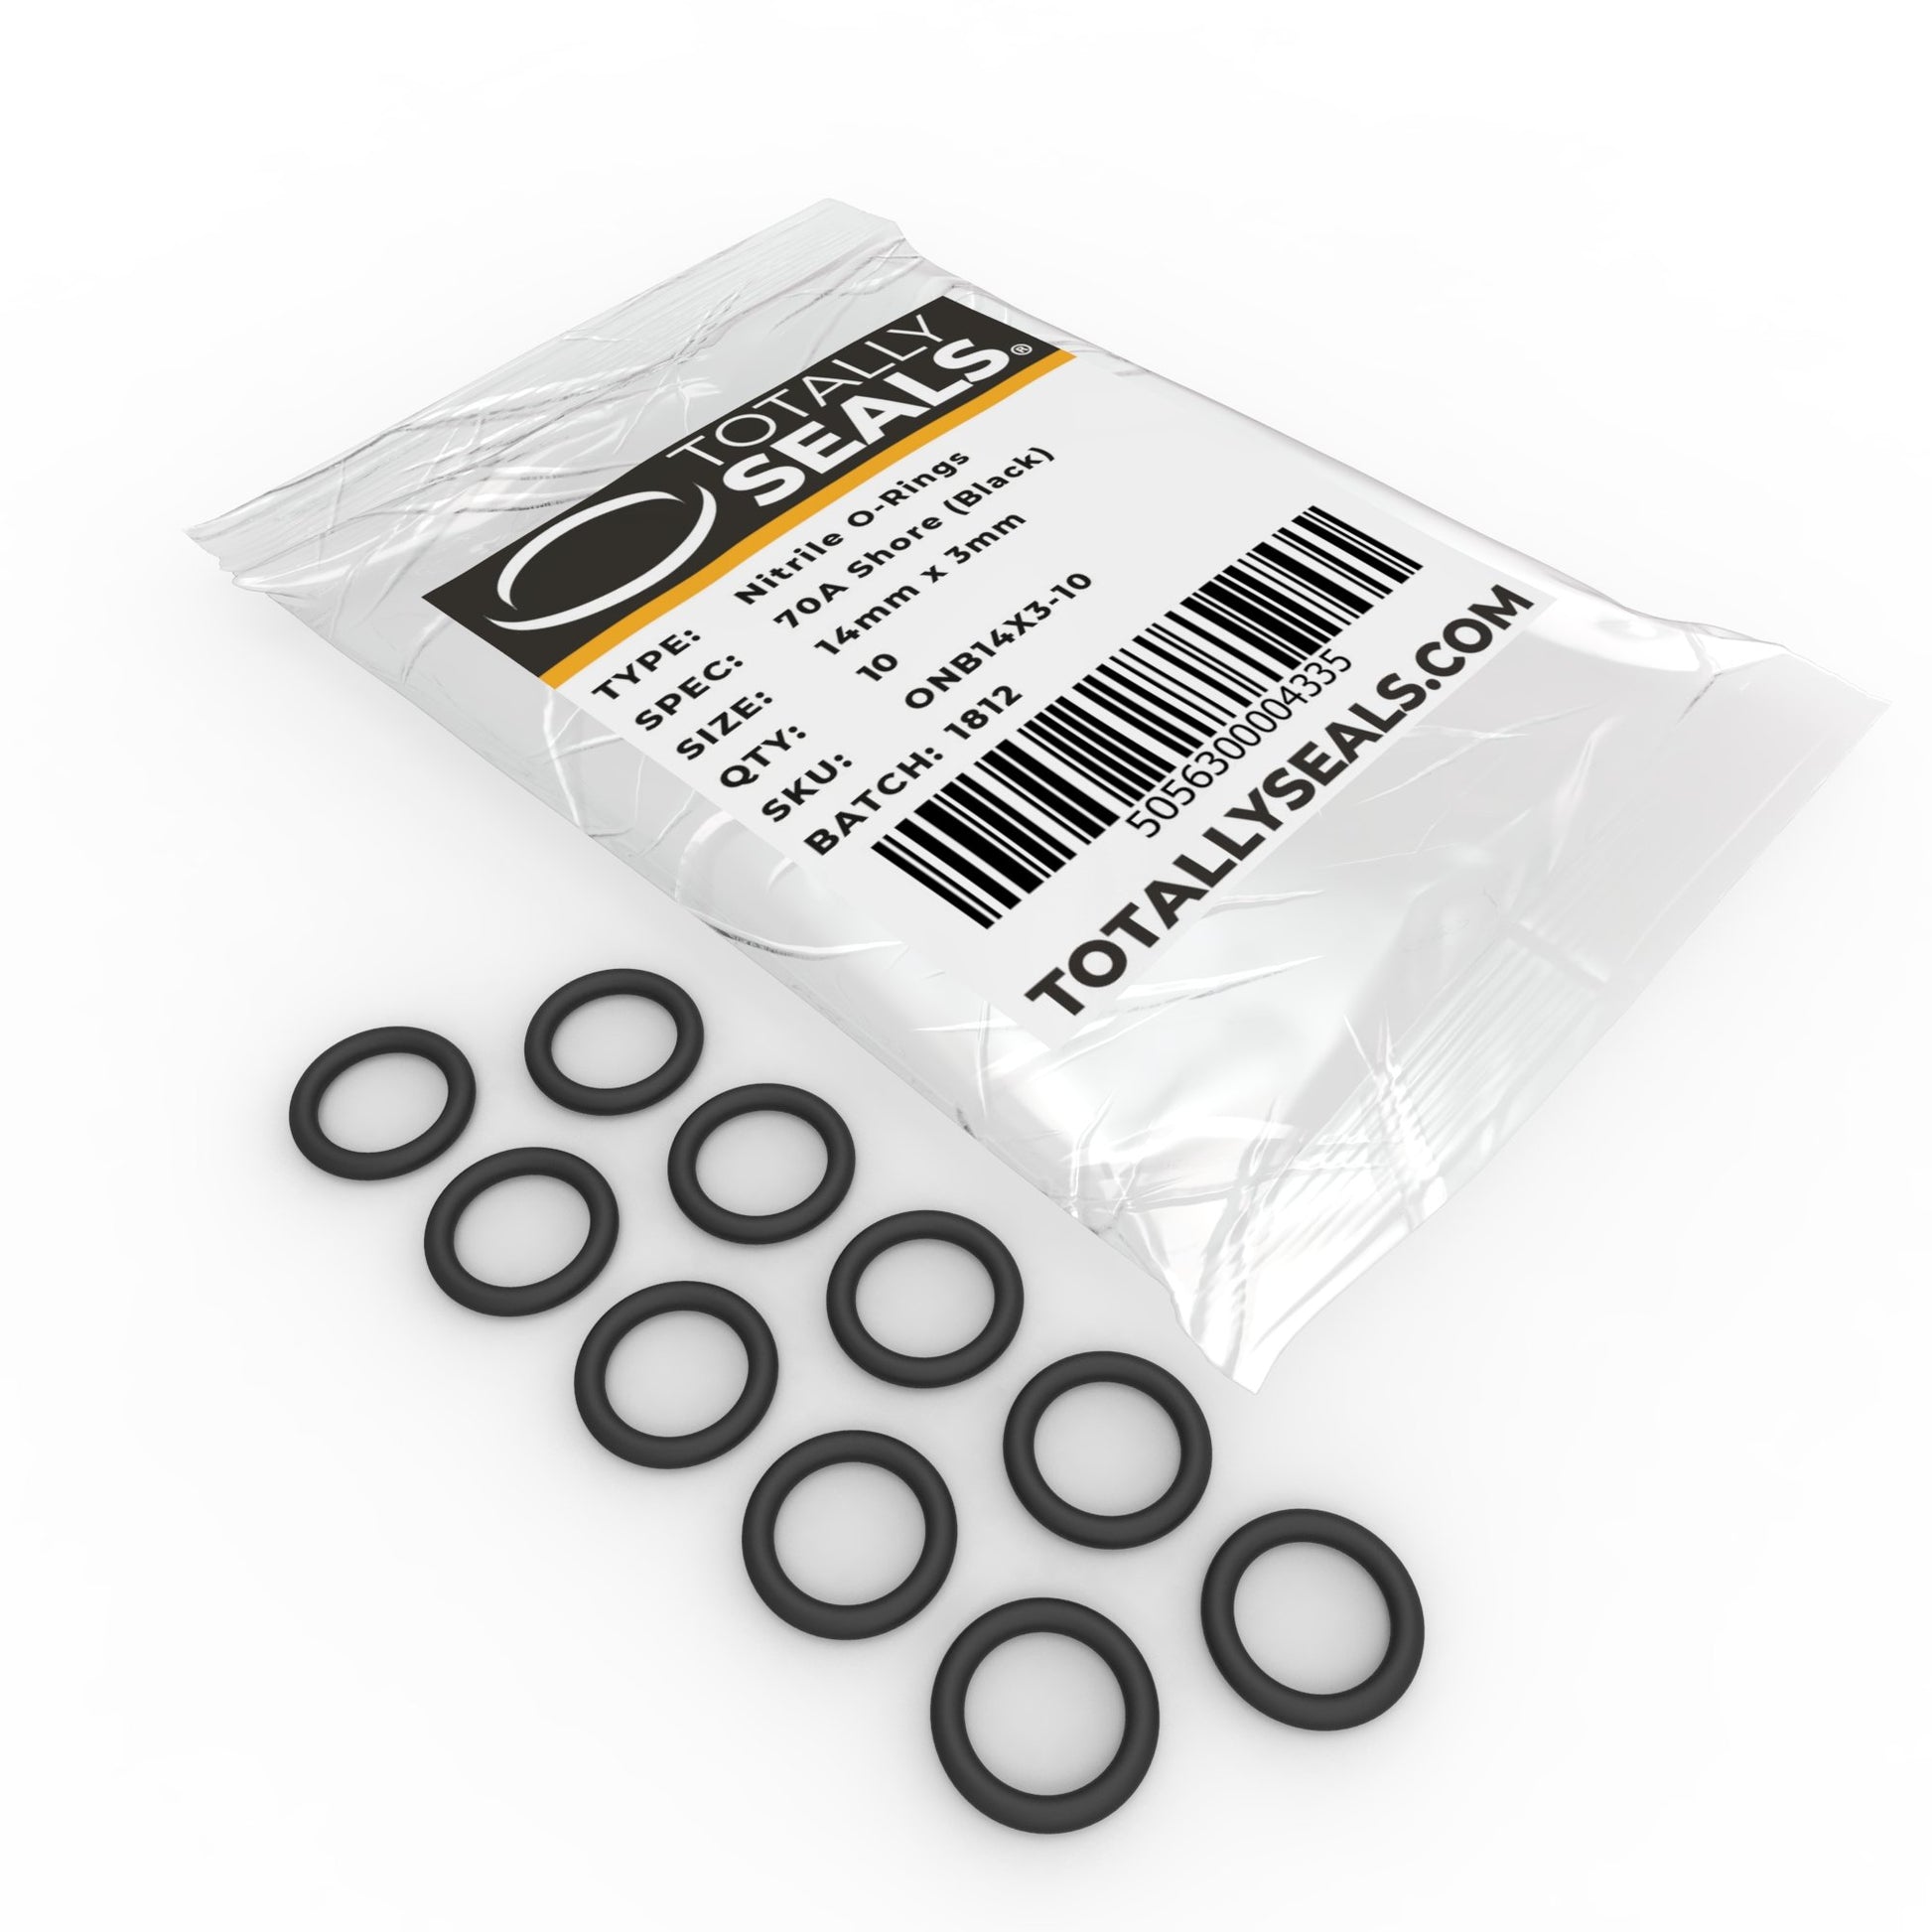 14mm x 3mm (20mm OD) Nitrile O-Rings - Totally Seals®